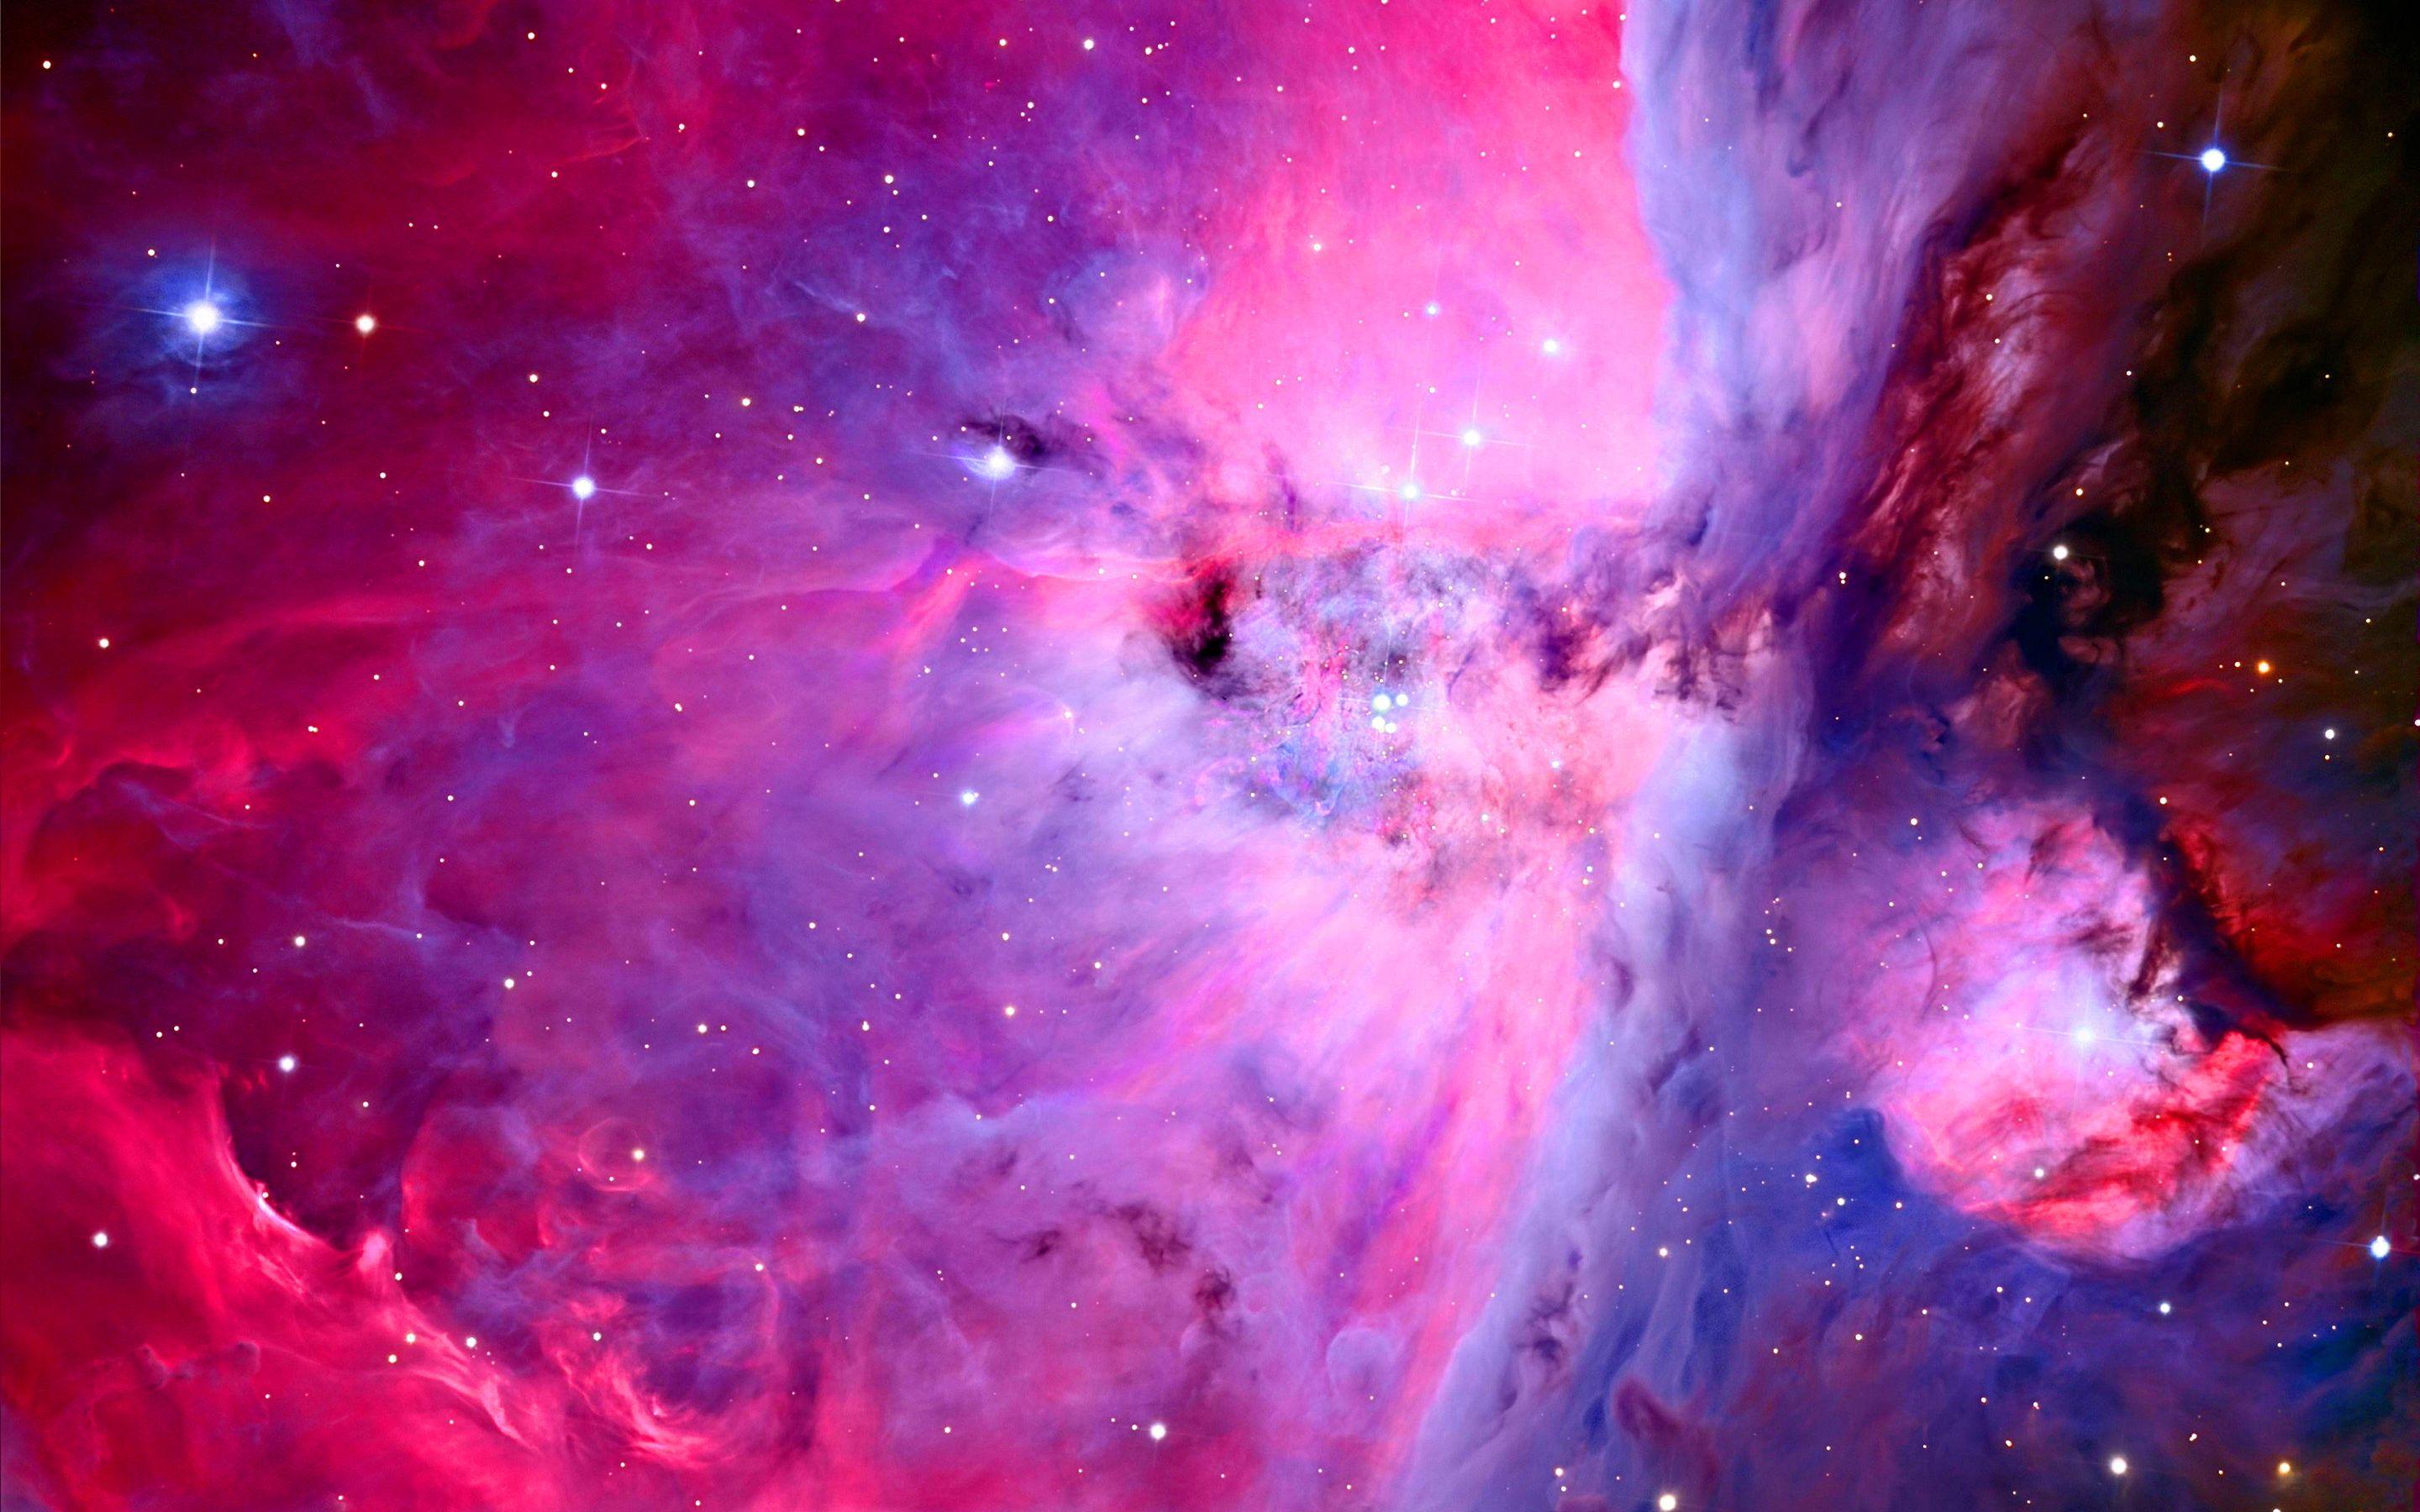 Pink and Blue Space Wallpapers - Top Free Pink and Blue Space